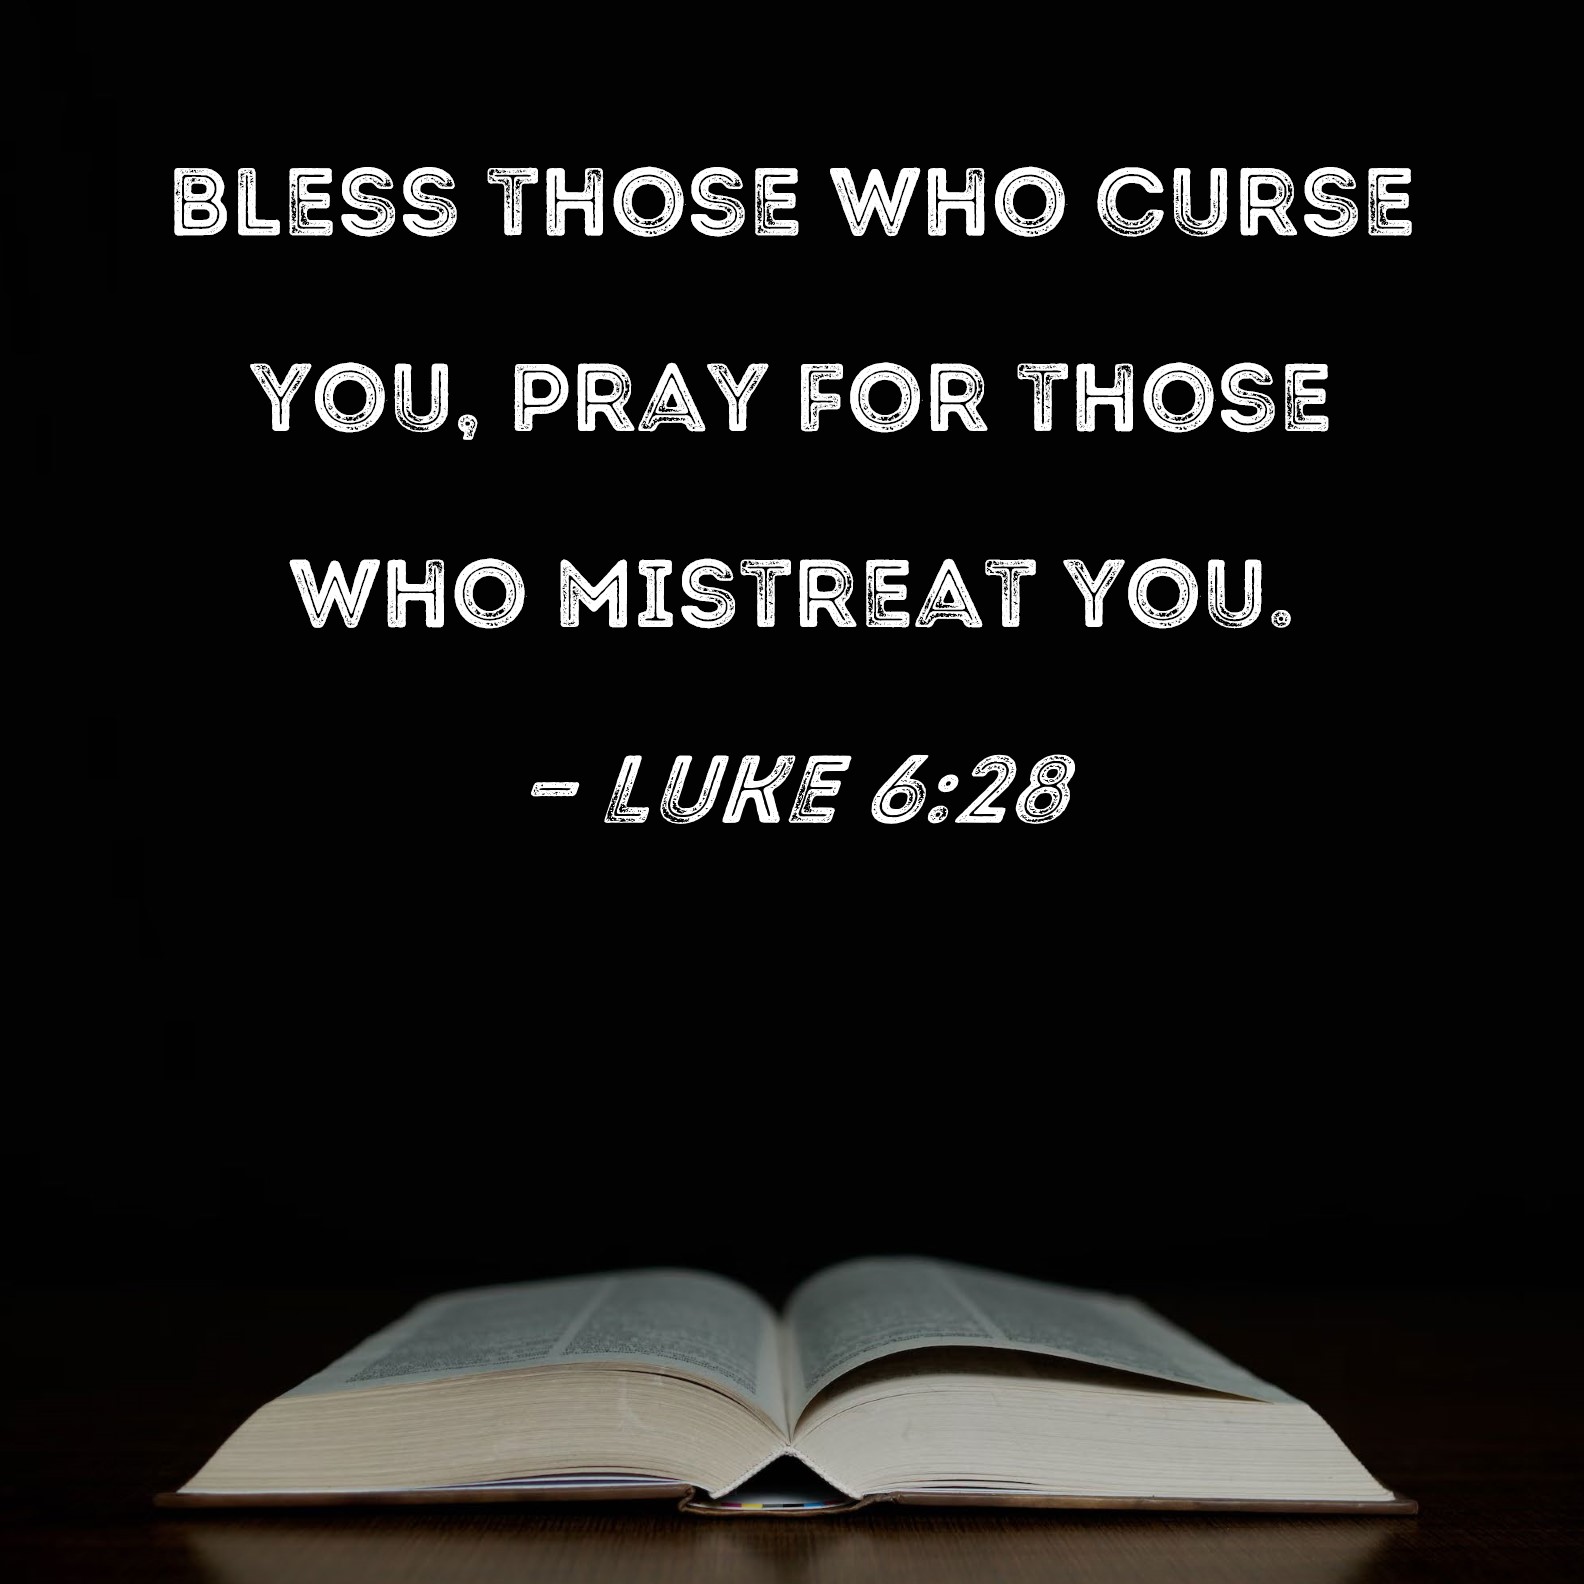 What does it mean to bless those who curse you (Luke 6:28)?